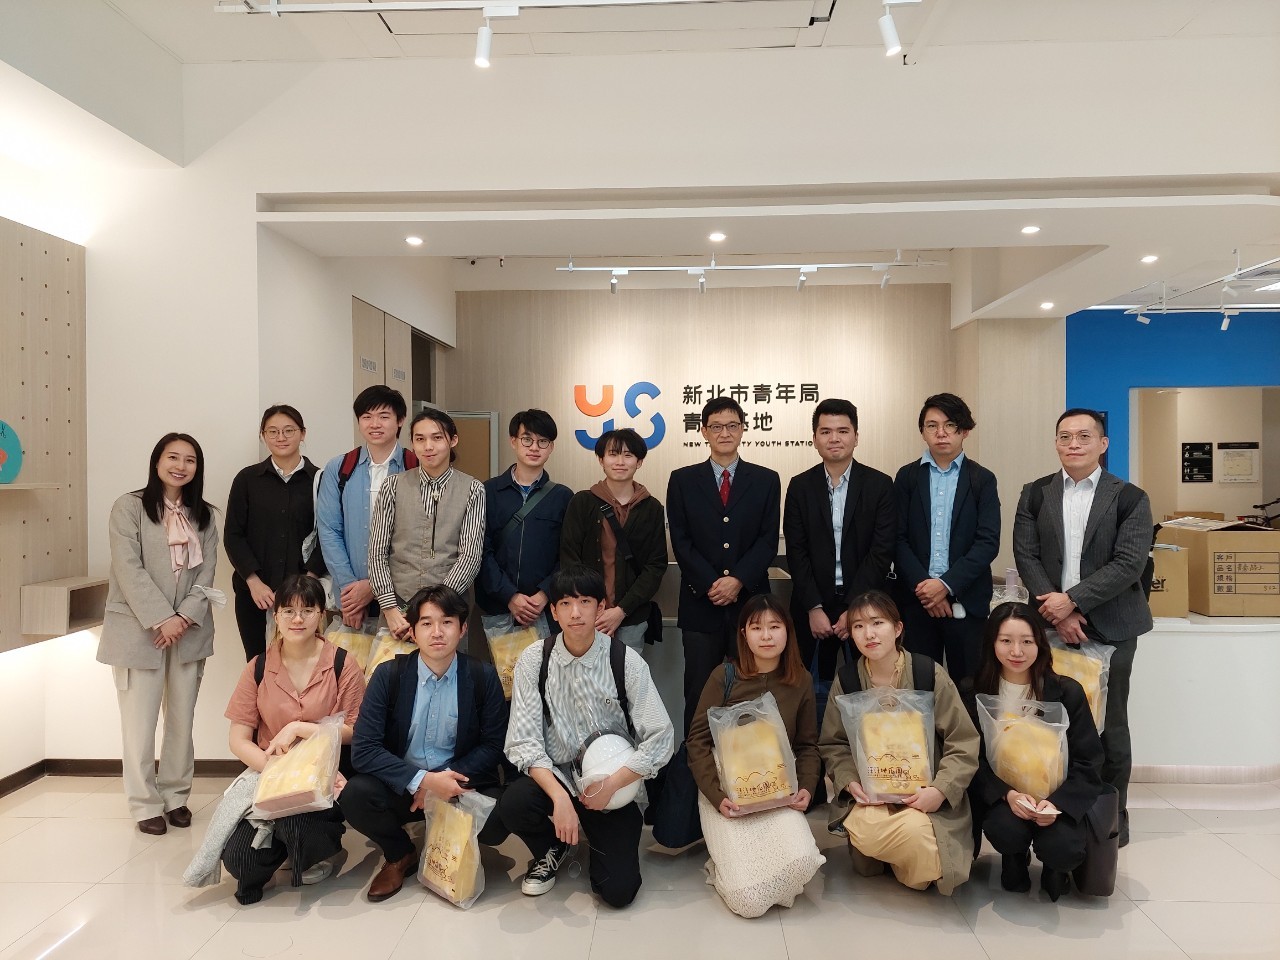 2023.03.16 The Youth Department of New Taipei City Visits